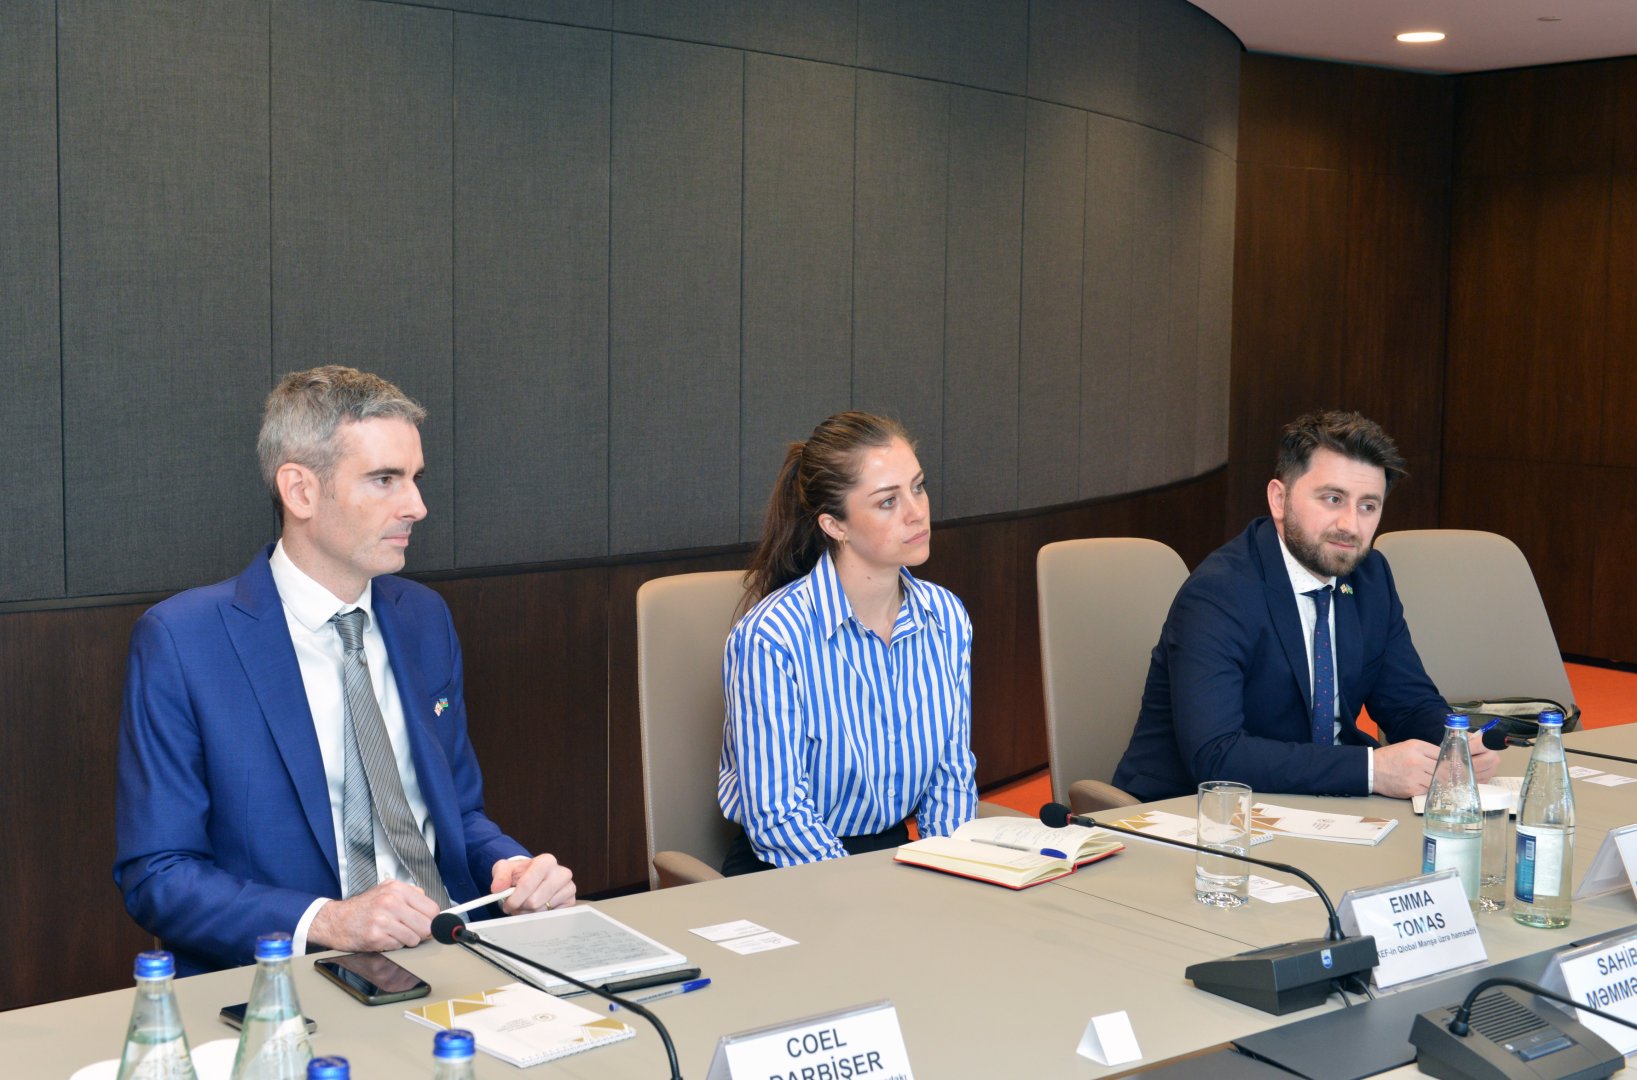 Azerbaijani economy ministry and UK export finance moot possible areas of cooperation (PHOTO)